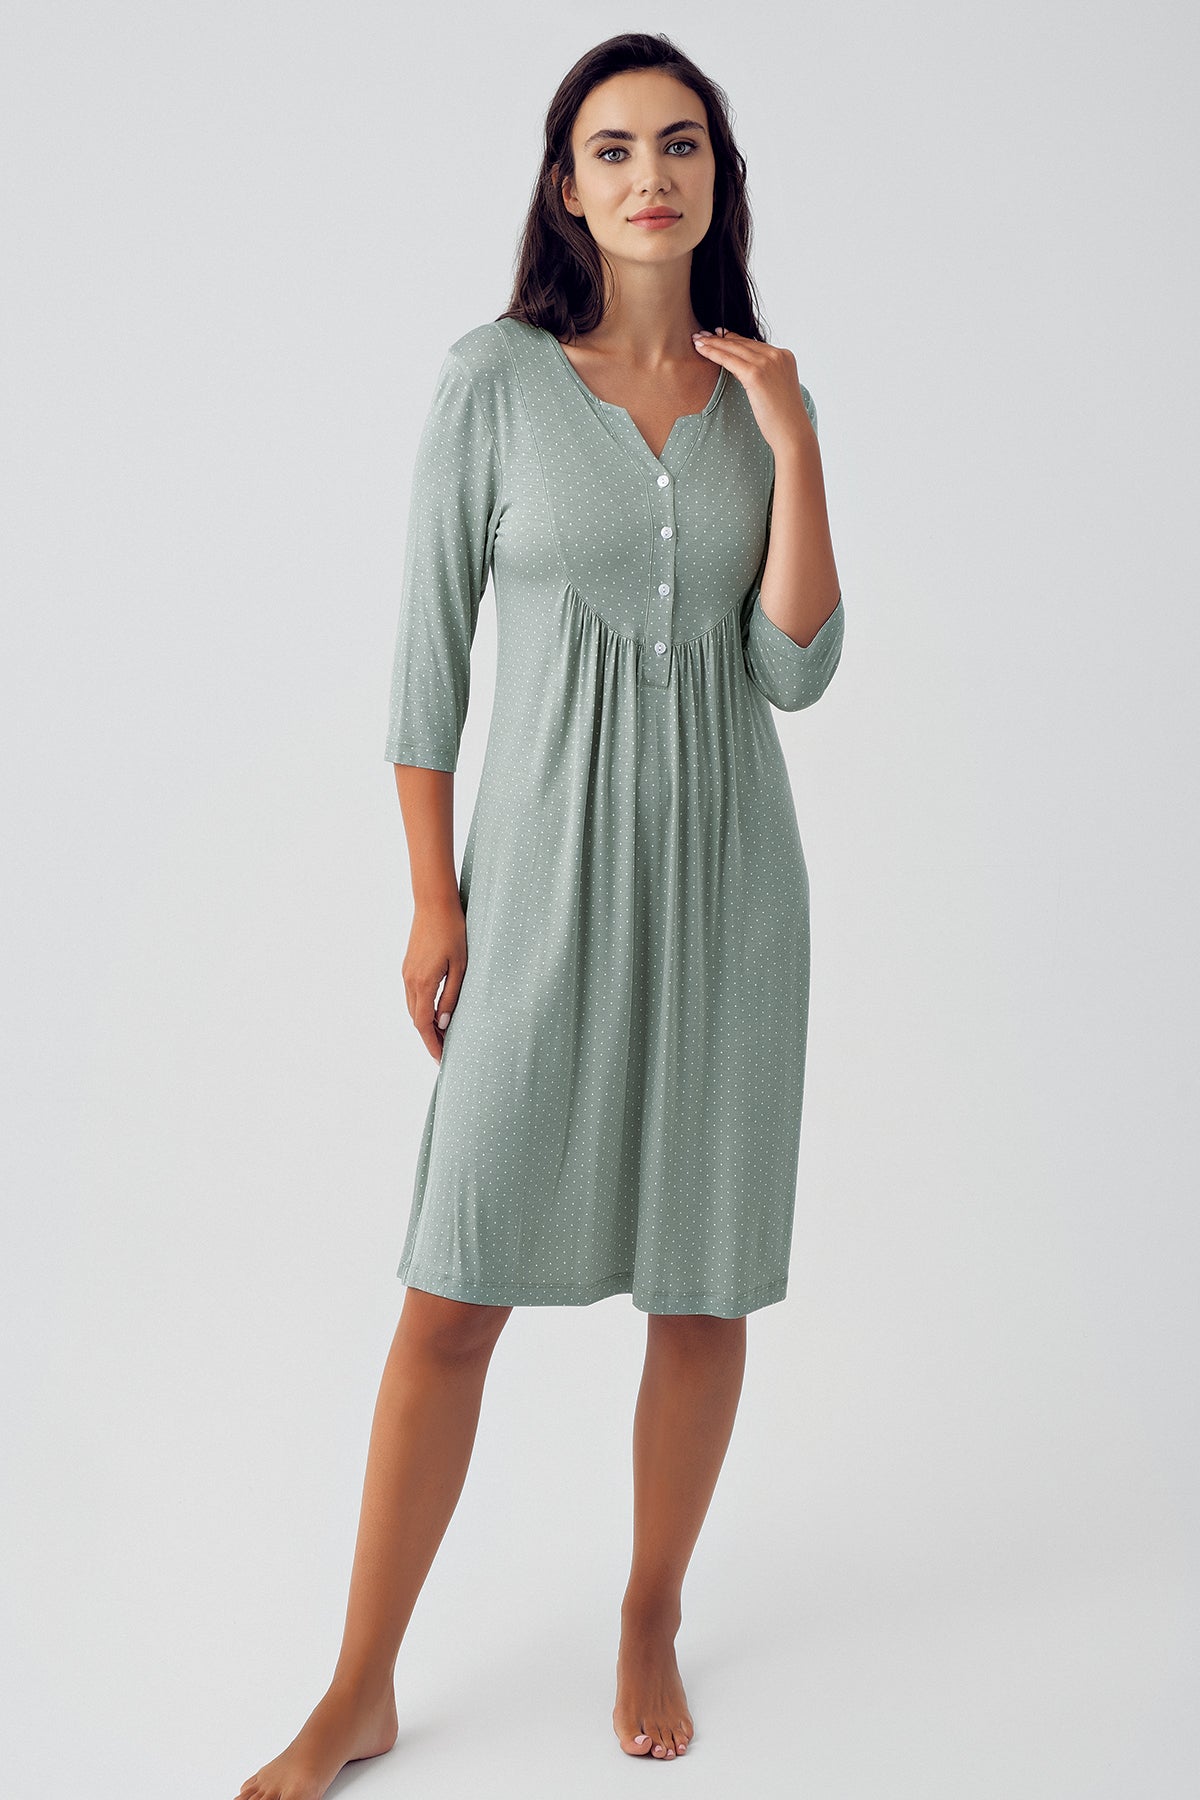 Shopymommy 15404 Polka Dot Maternity & Nursing Nightgown With Flower Patterned Robe Green